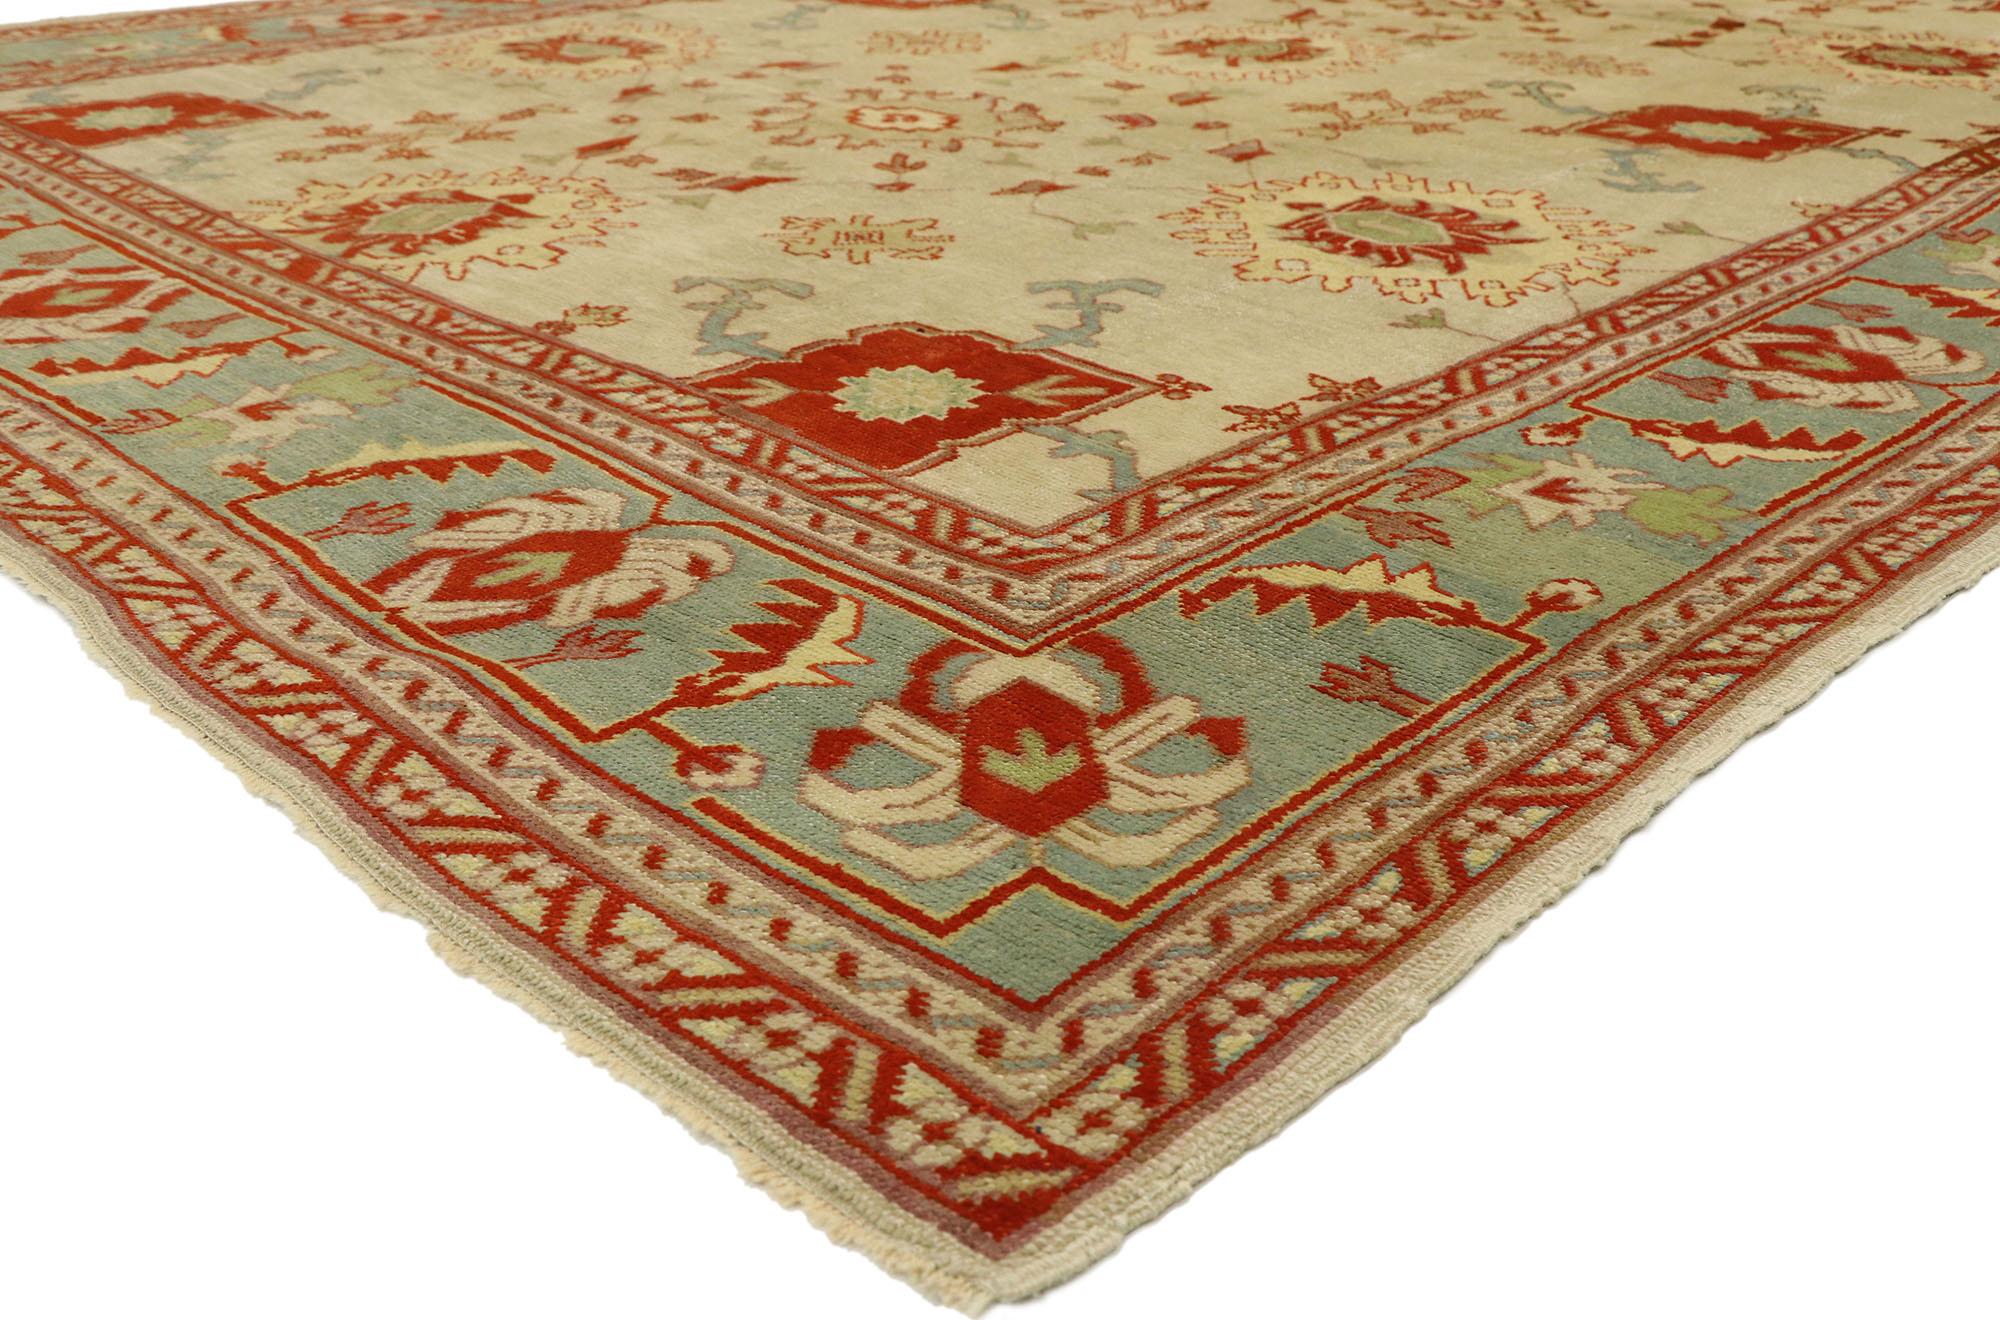 73883 Antique Turkish Oushak Rug with Mediterranean Style 09'00 X 12'02. Showcasing a timeless design and beguiling beauty, this hand knotted wool antique Turkish Oushak rug imparts a sense of warmth and welcomed informality. It features an all-over